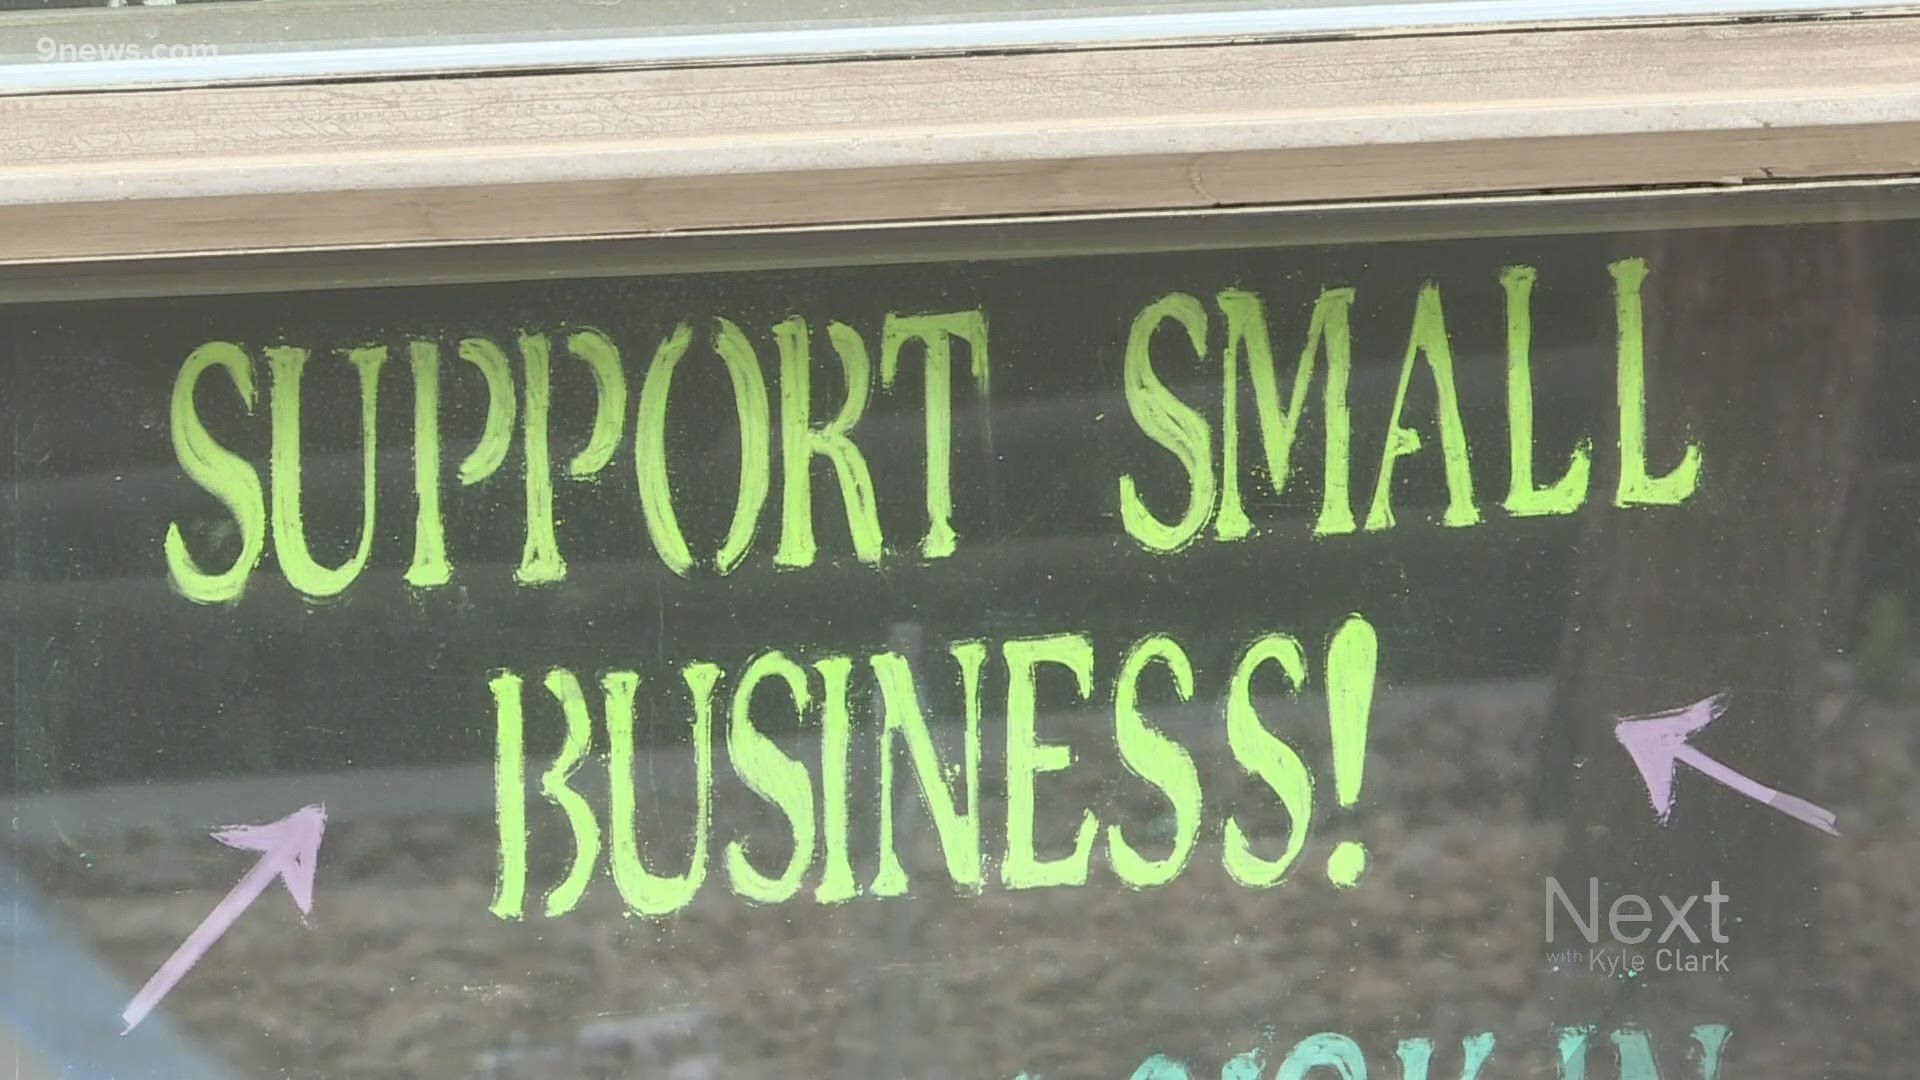 Senate Bill 20B-001 is geared to help small businesses struggling during the pandemic in Colorado, though it can't address all of the problems business owners face.